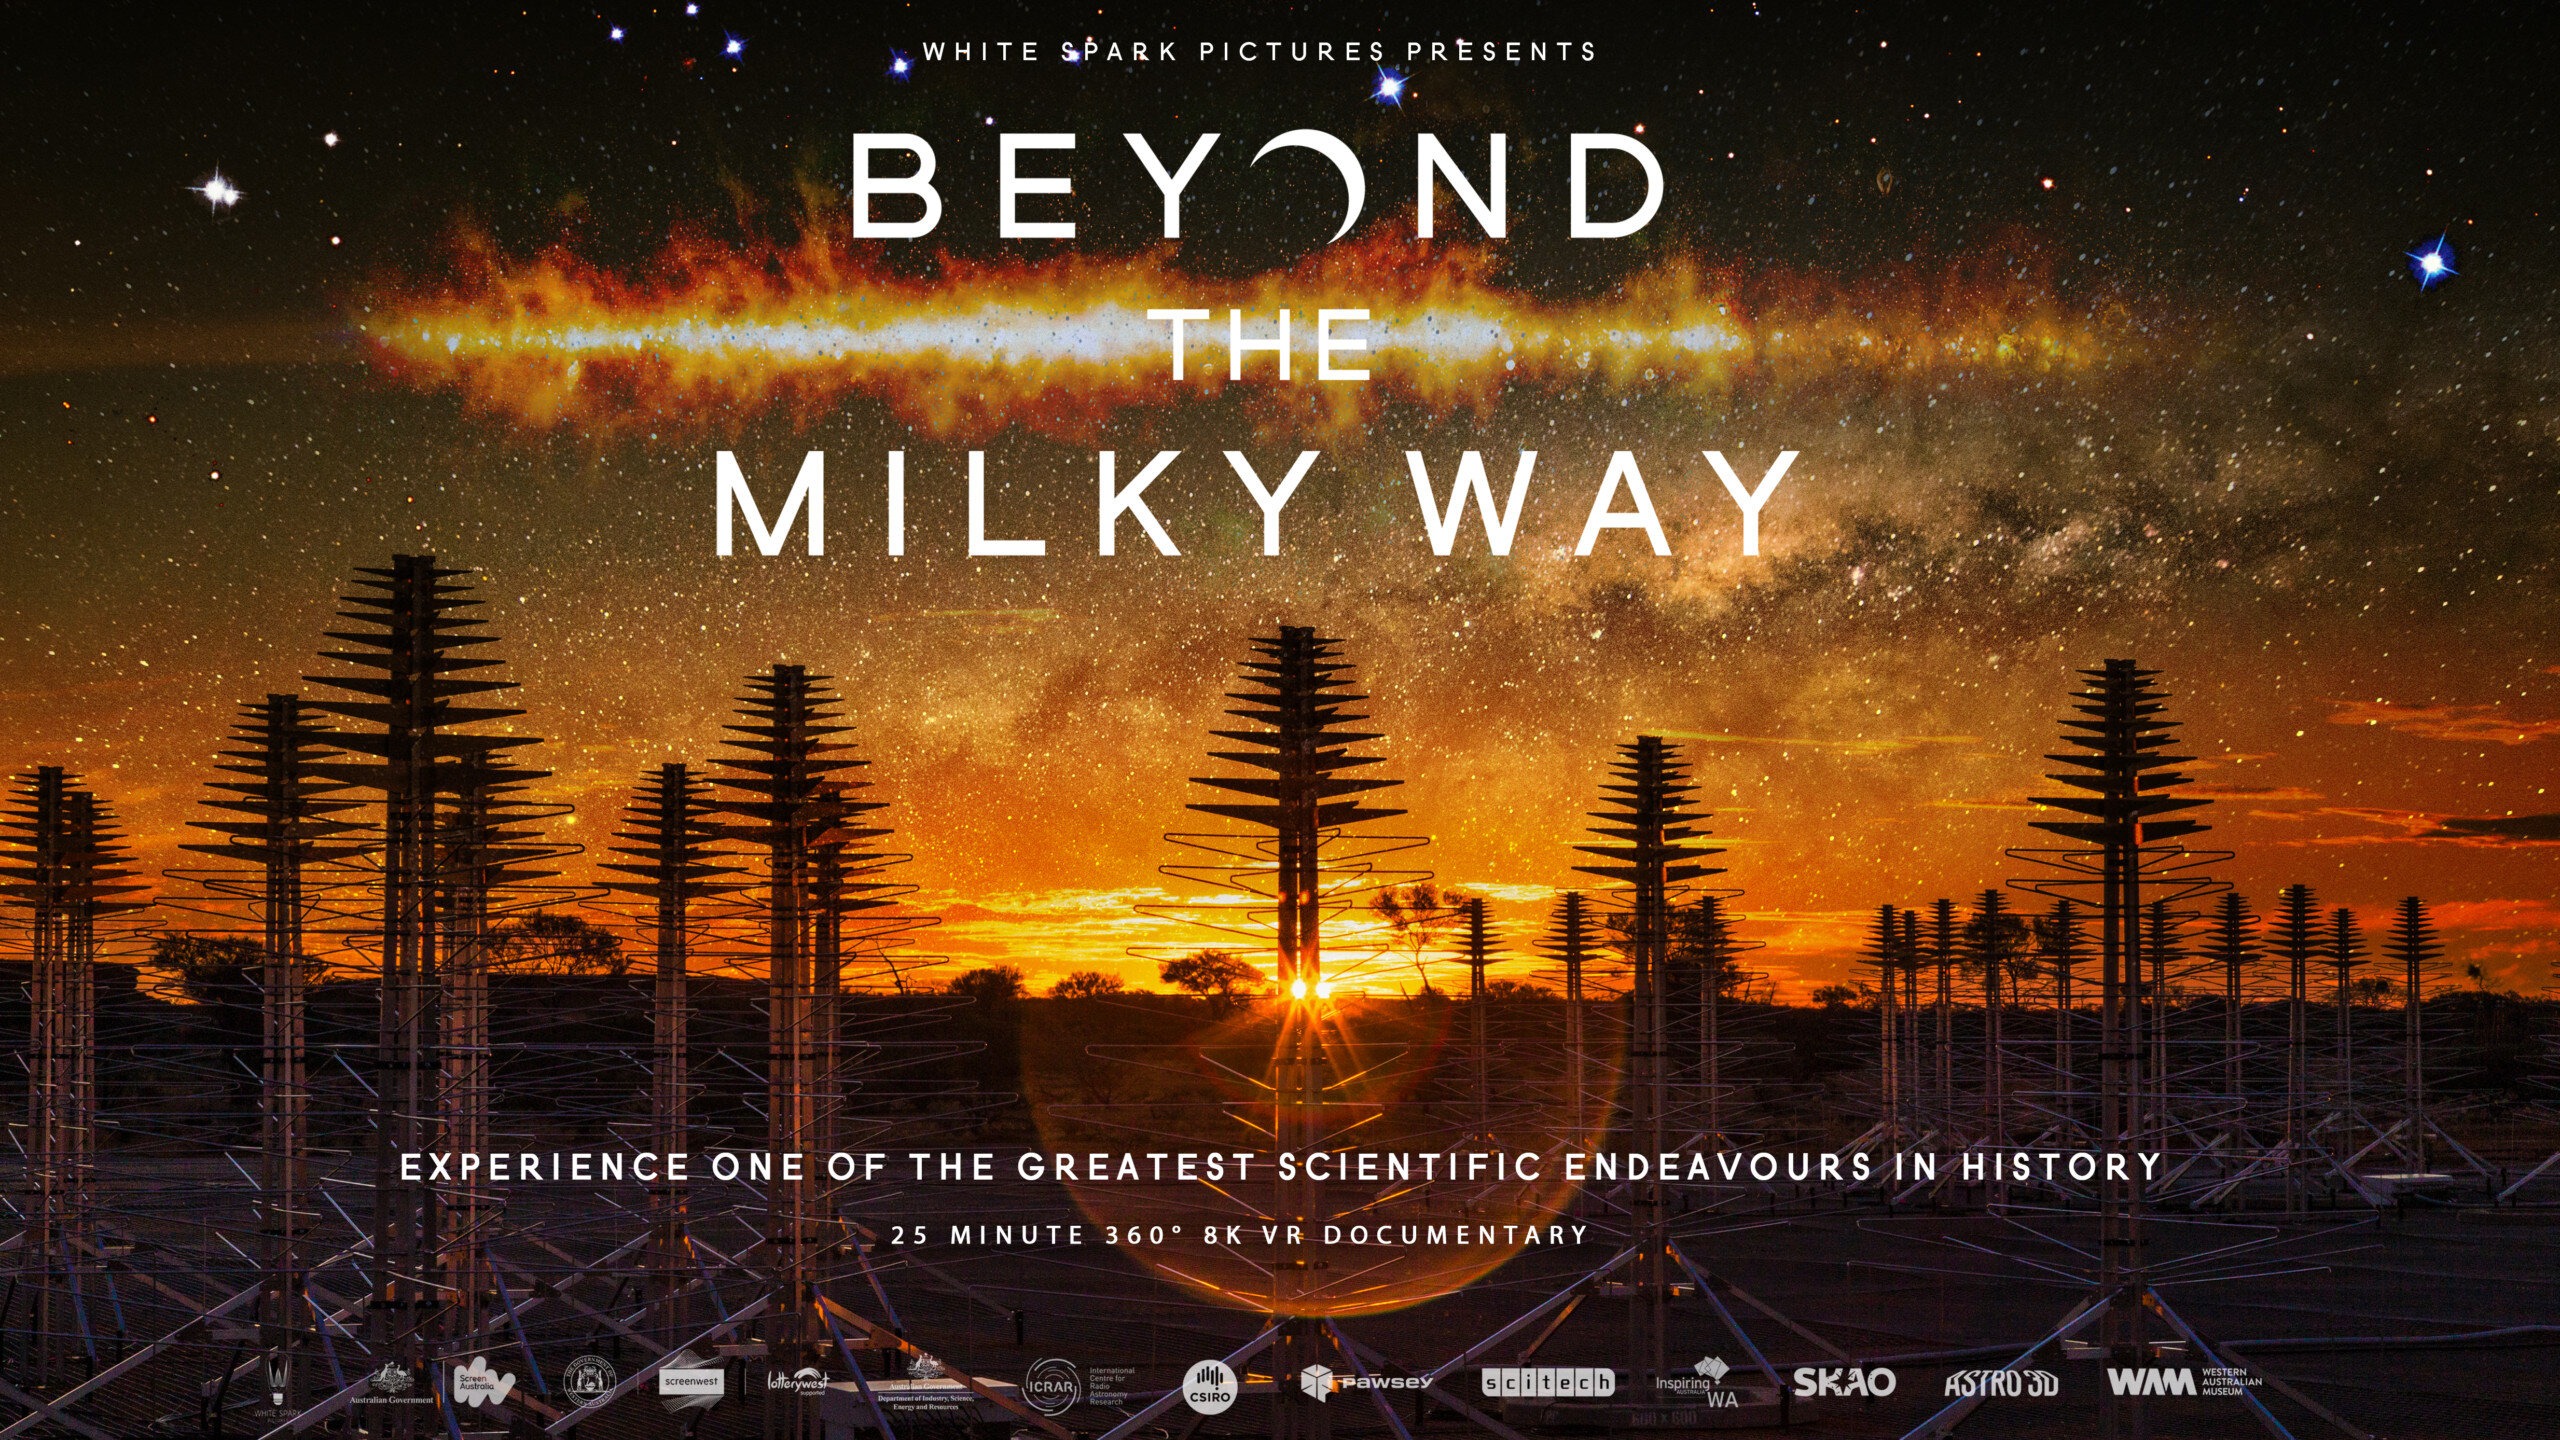 Beyond the Milky Way